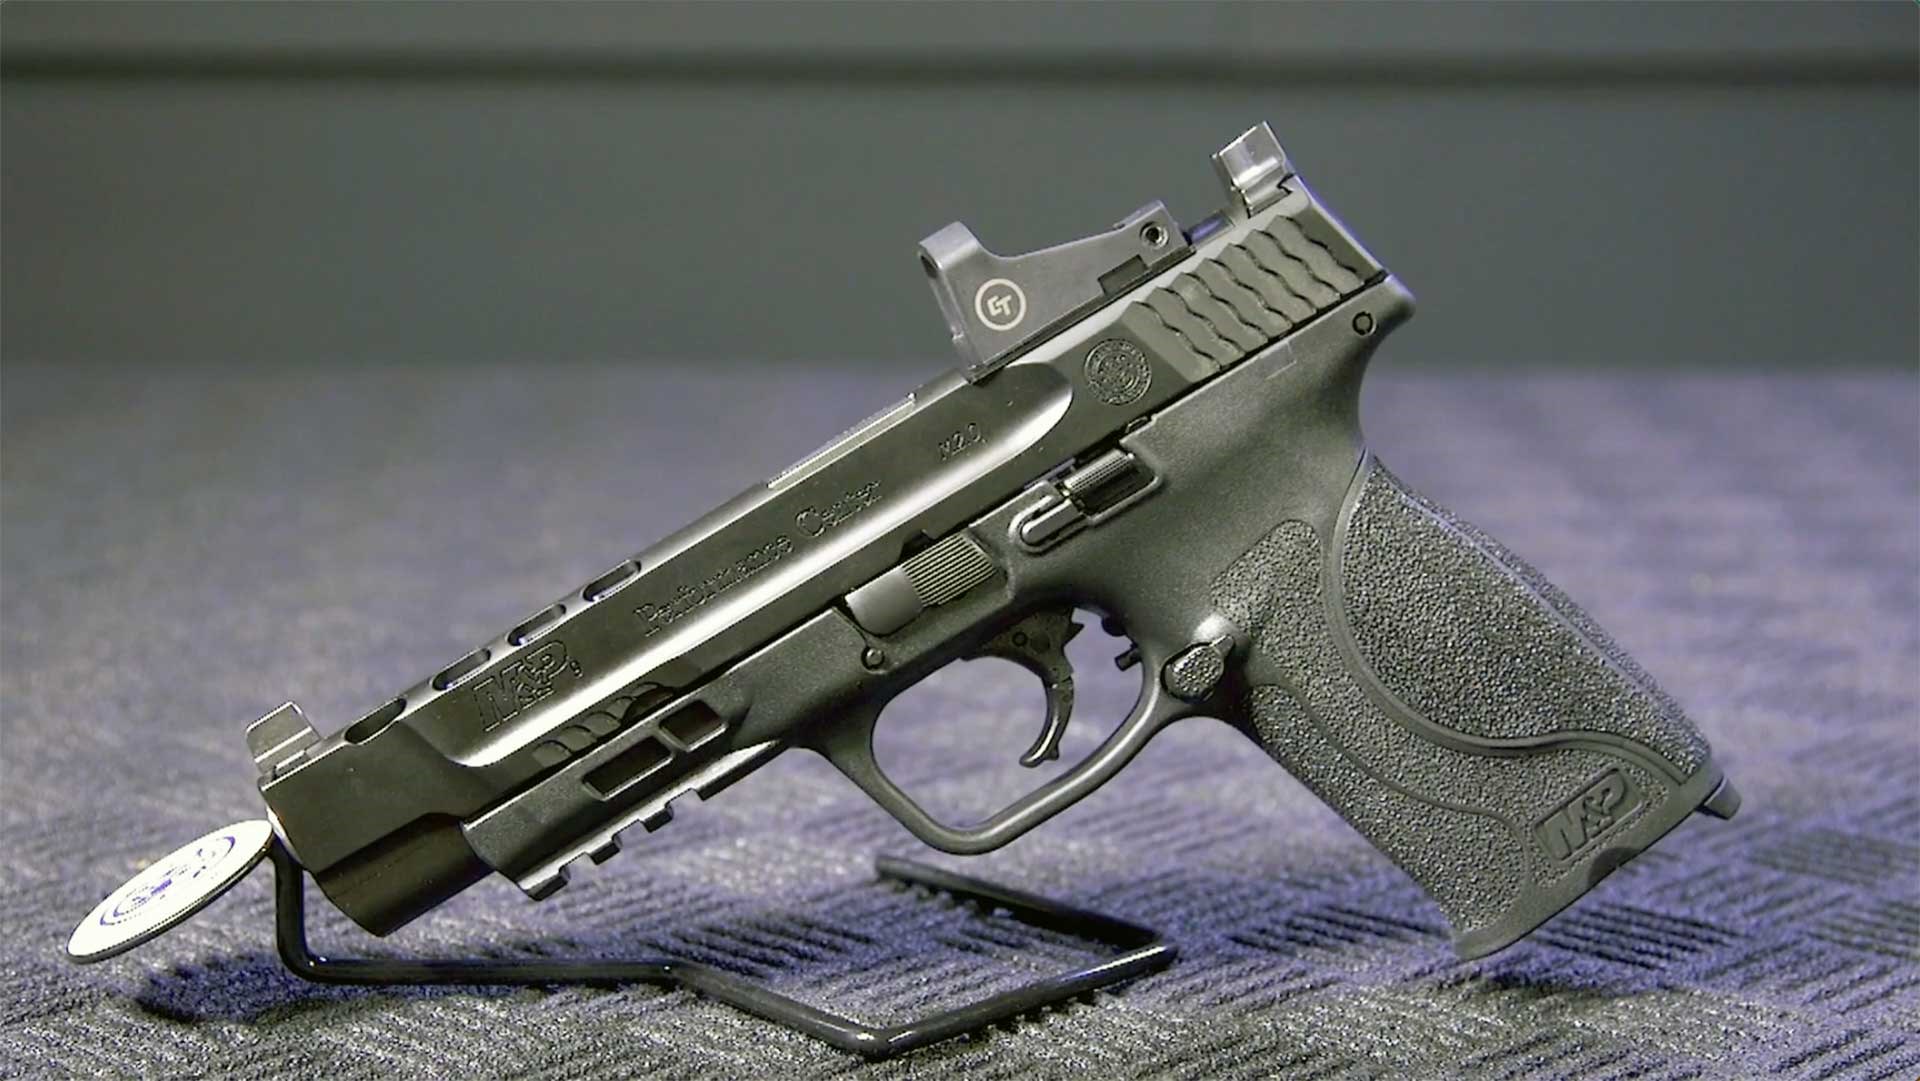 A Smith & Wesson Performance Center M&P pistol with a red-dot optic shown on a textured black surface.